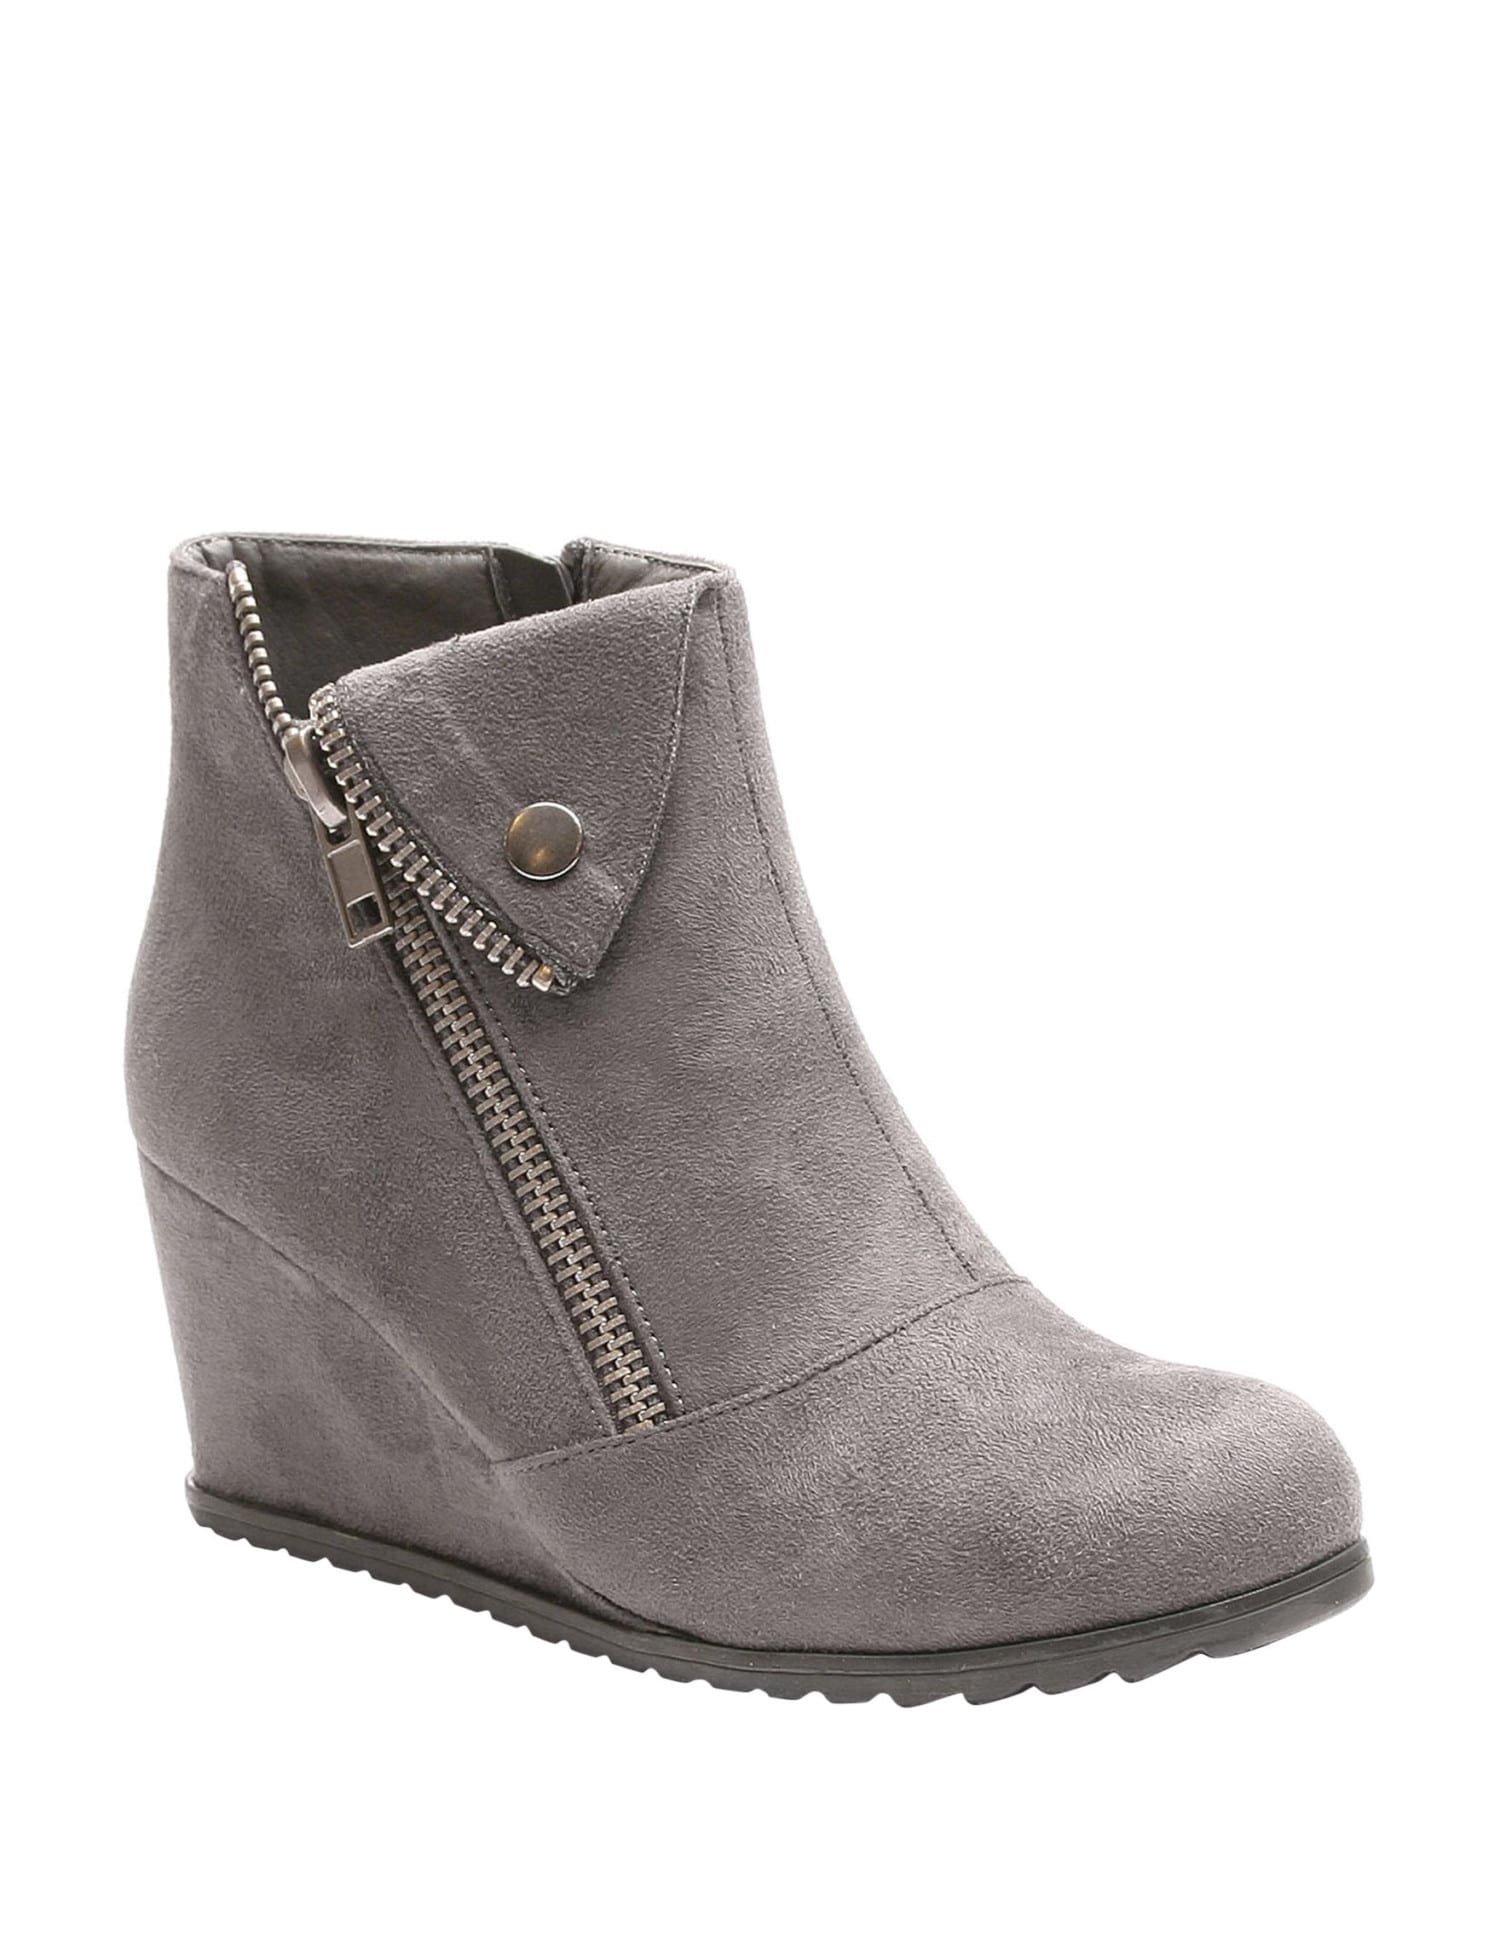 Comfy Wedge Booties You'll Want To Wear 